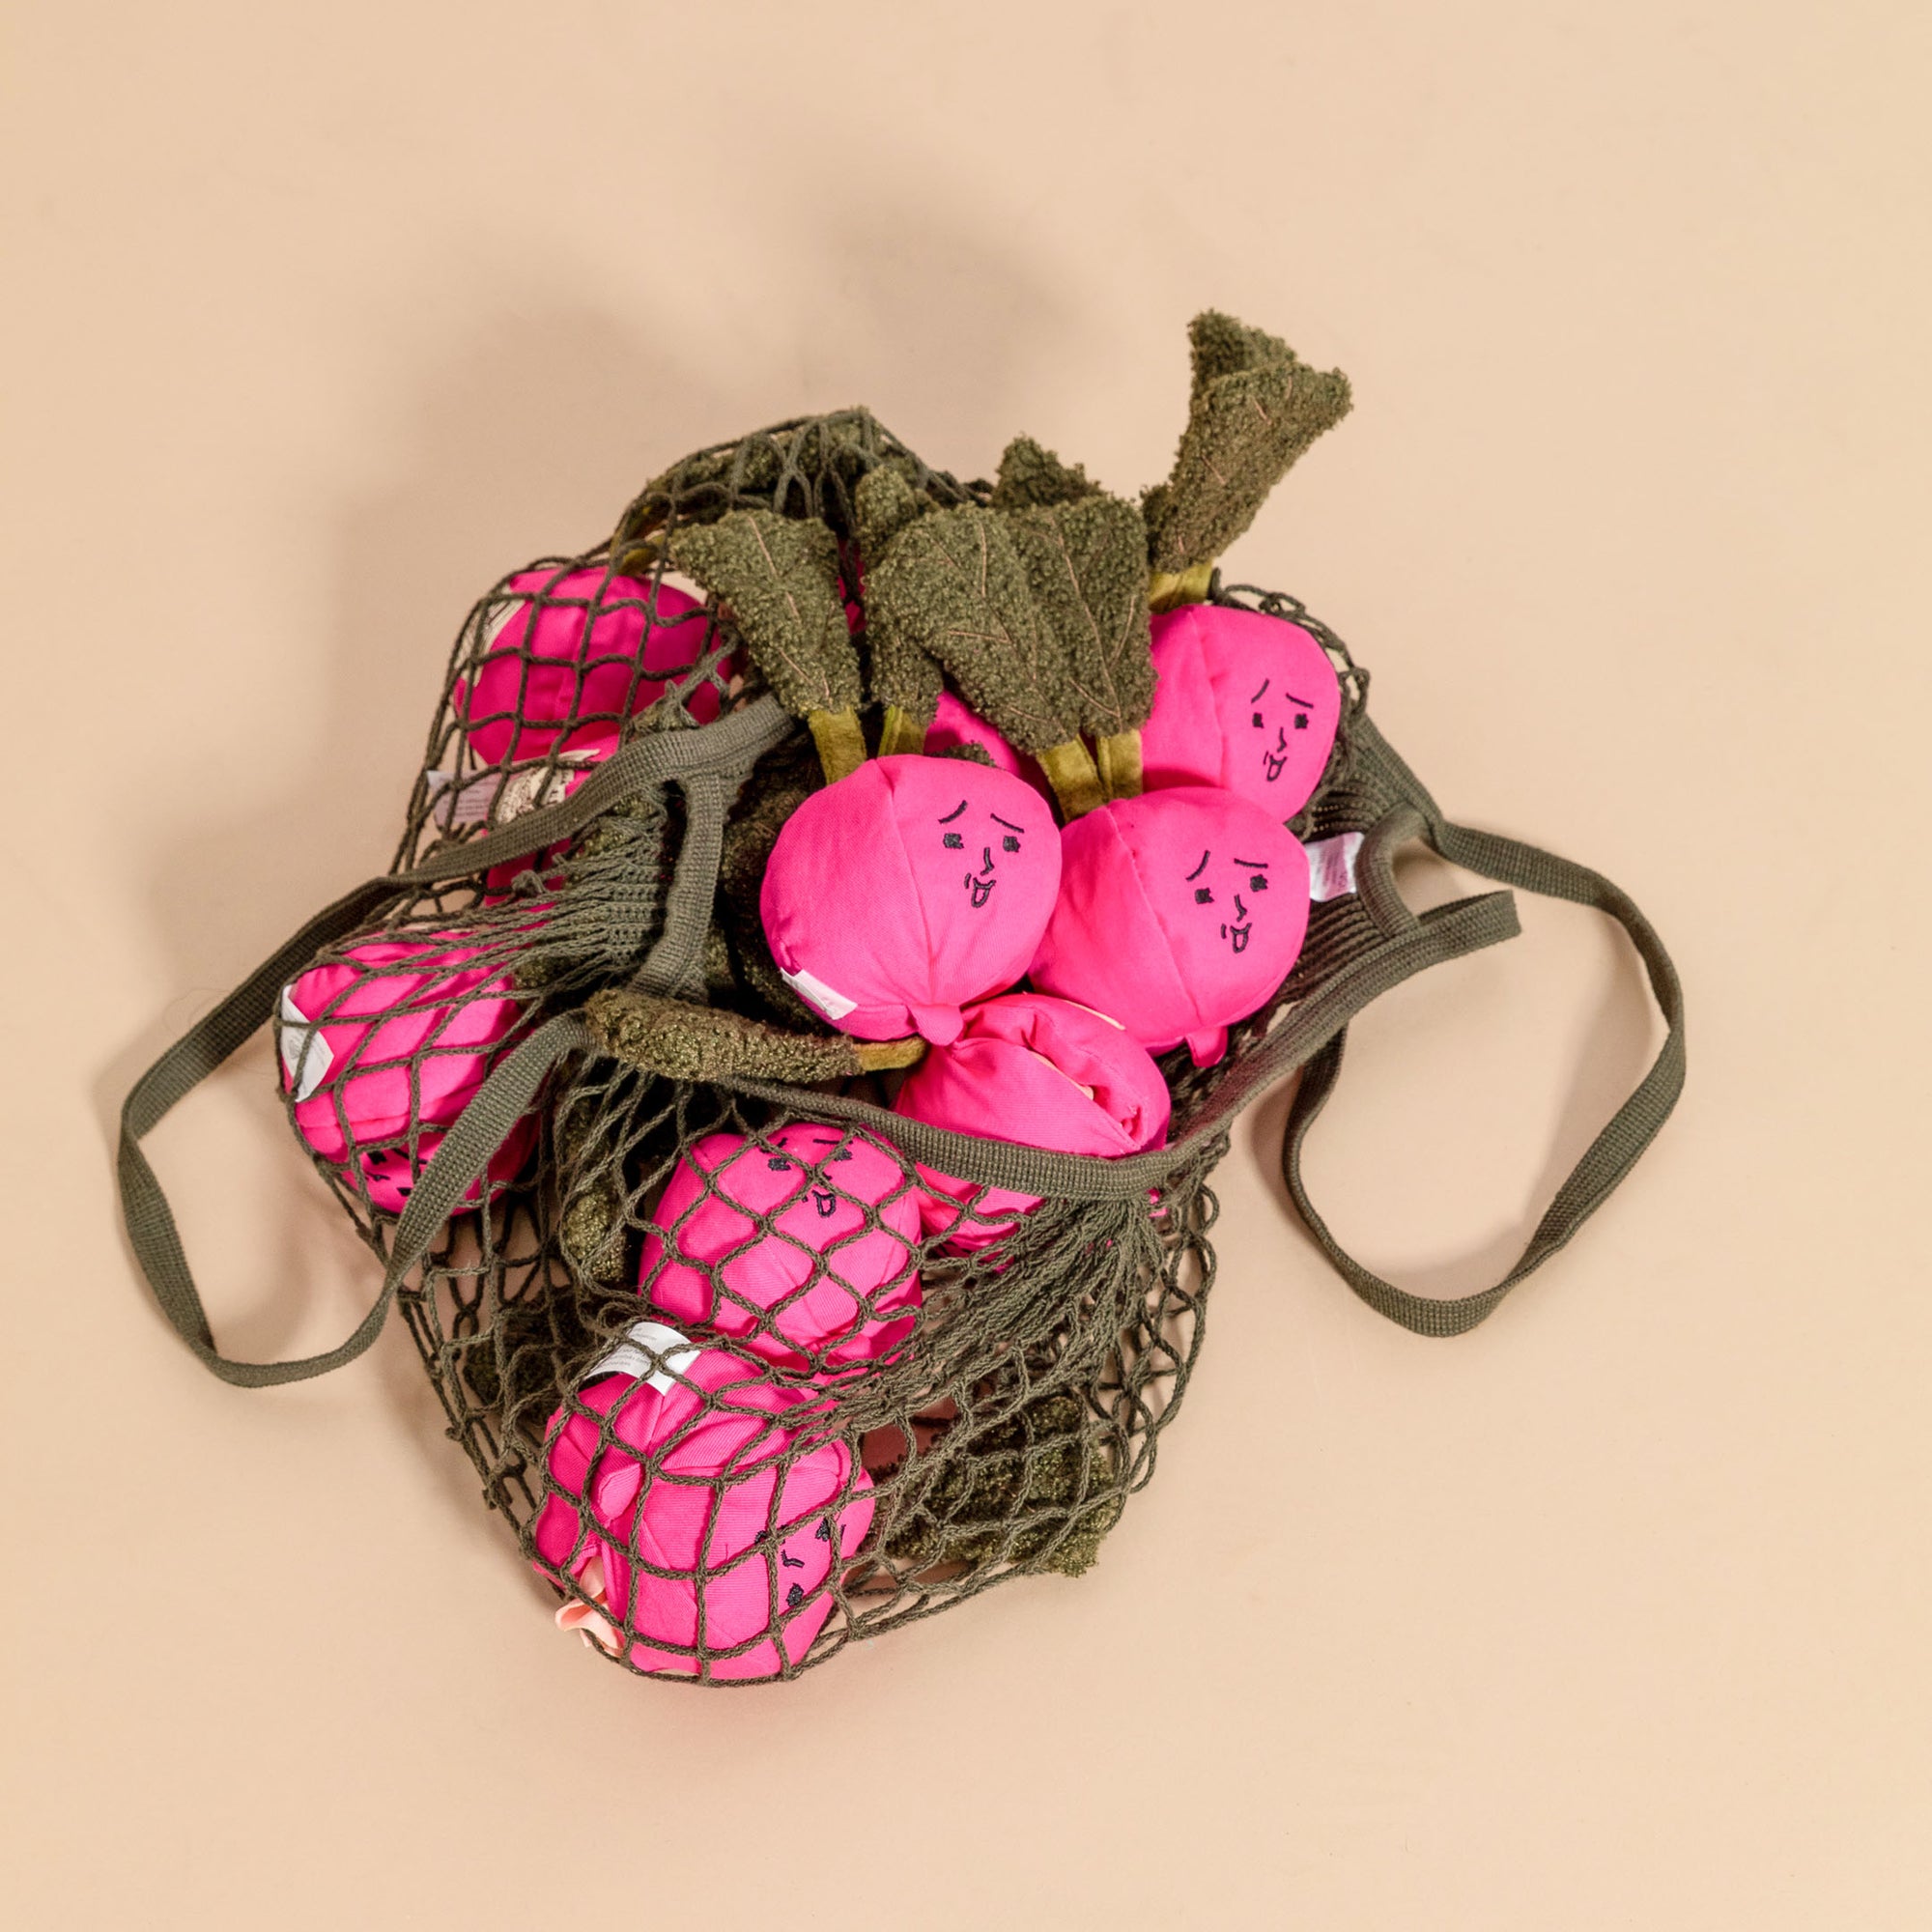 The image displays a collection of pink radish-shaped dog toys with sleepy faces, nestled in a green net bag. The toys are designed with bright pink bulbs and green tops to closely resemble real radishes. This playful design is both visually charming and likely to be engaging for pets, with the net bag adding a practical element for storage and transport. The toys are set against a peach-colored background, which complements the toys' colors and creates a warm, inviting aesthetic.